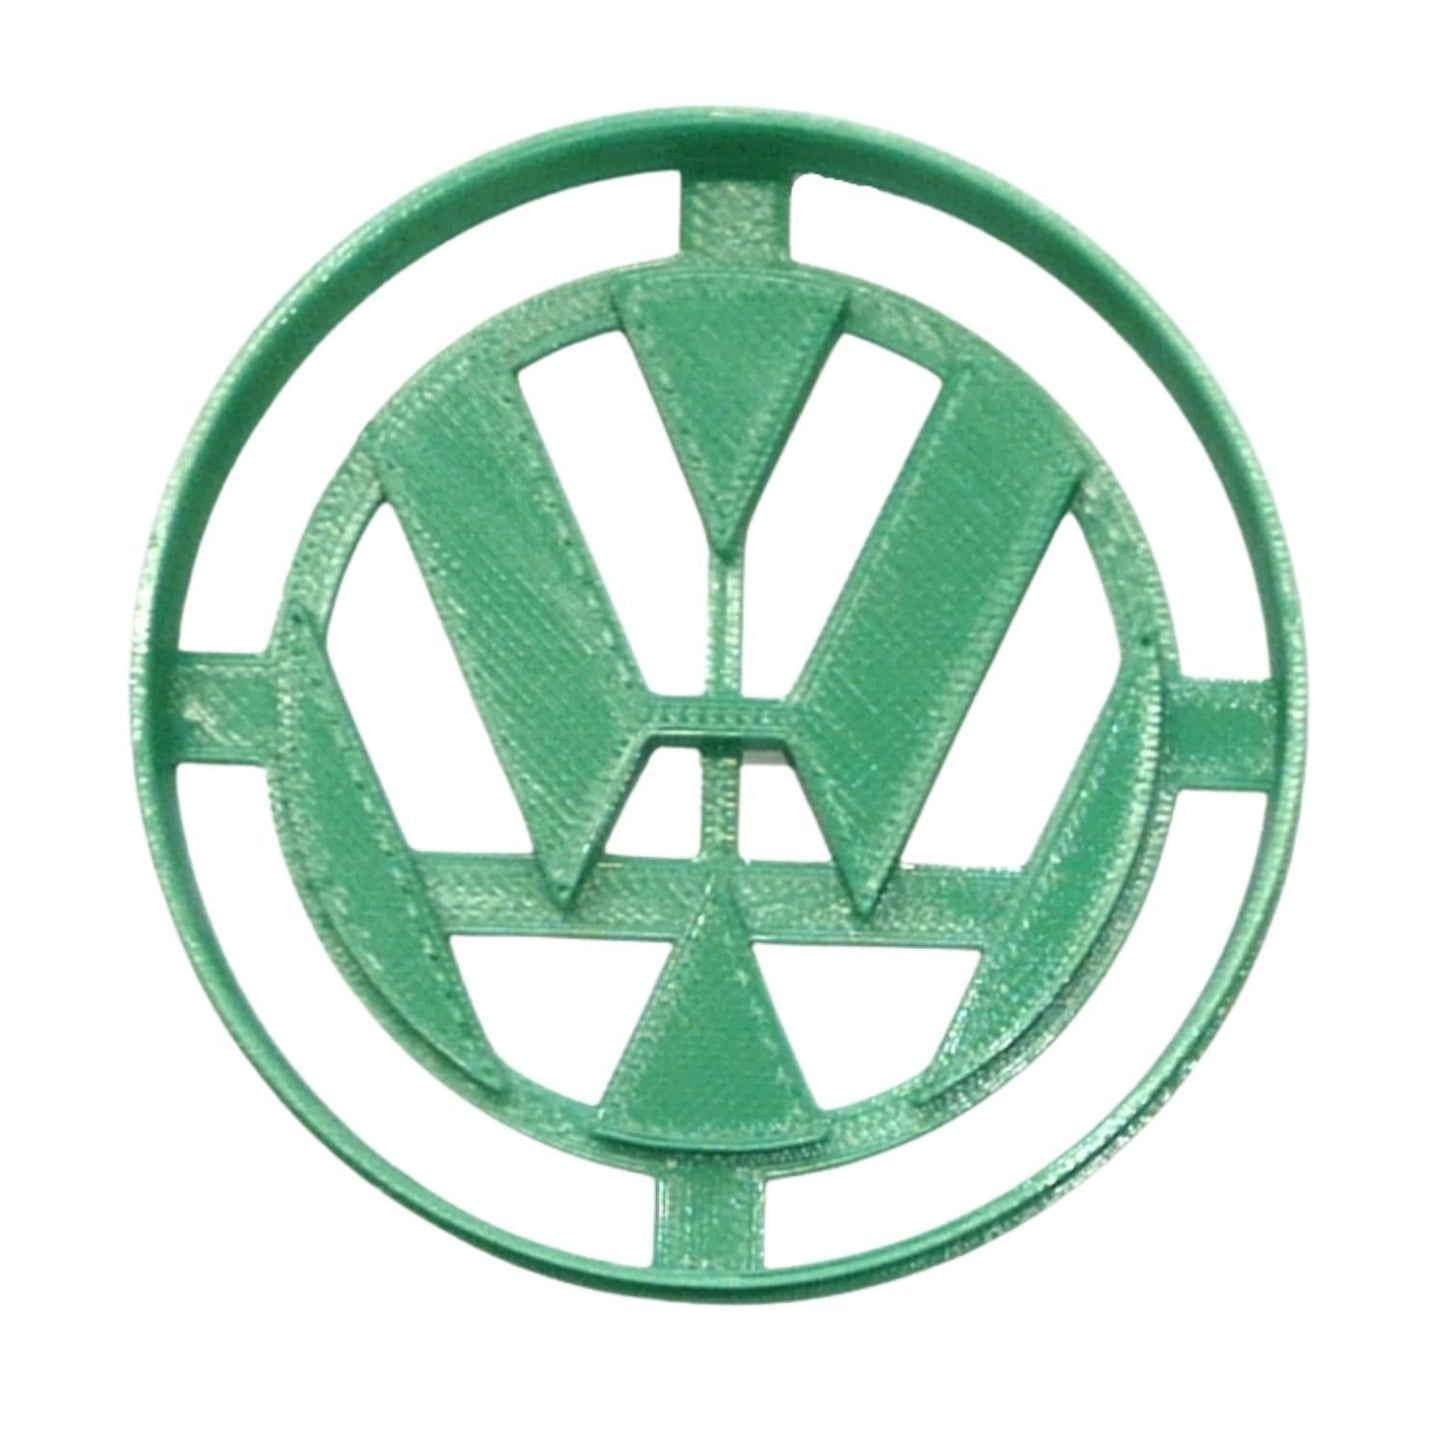 VW Volkswagon Luxury Vehicle Iconic Symbol Cookie Cutter Made In USA PR4543